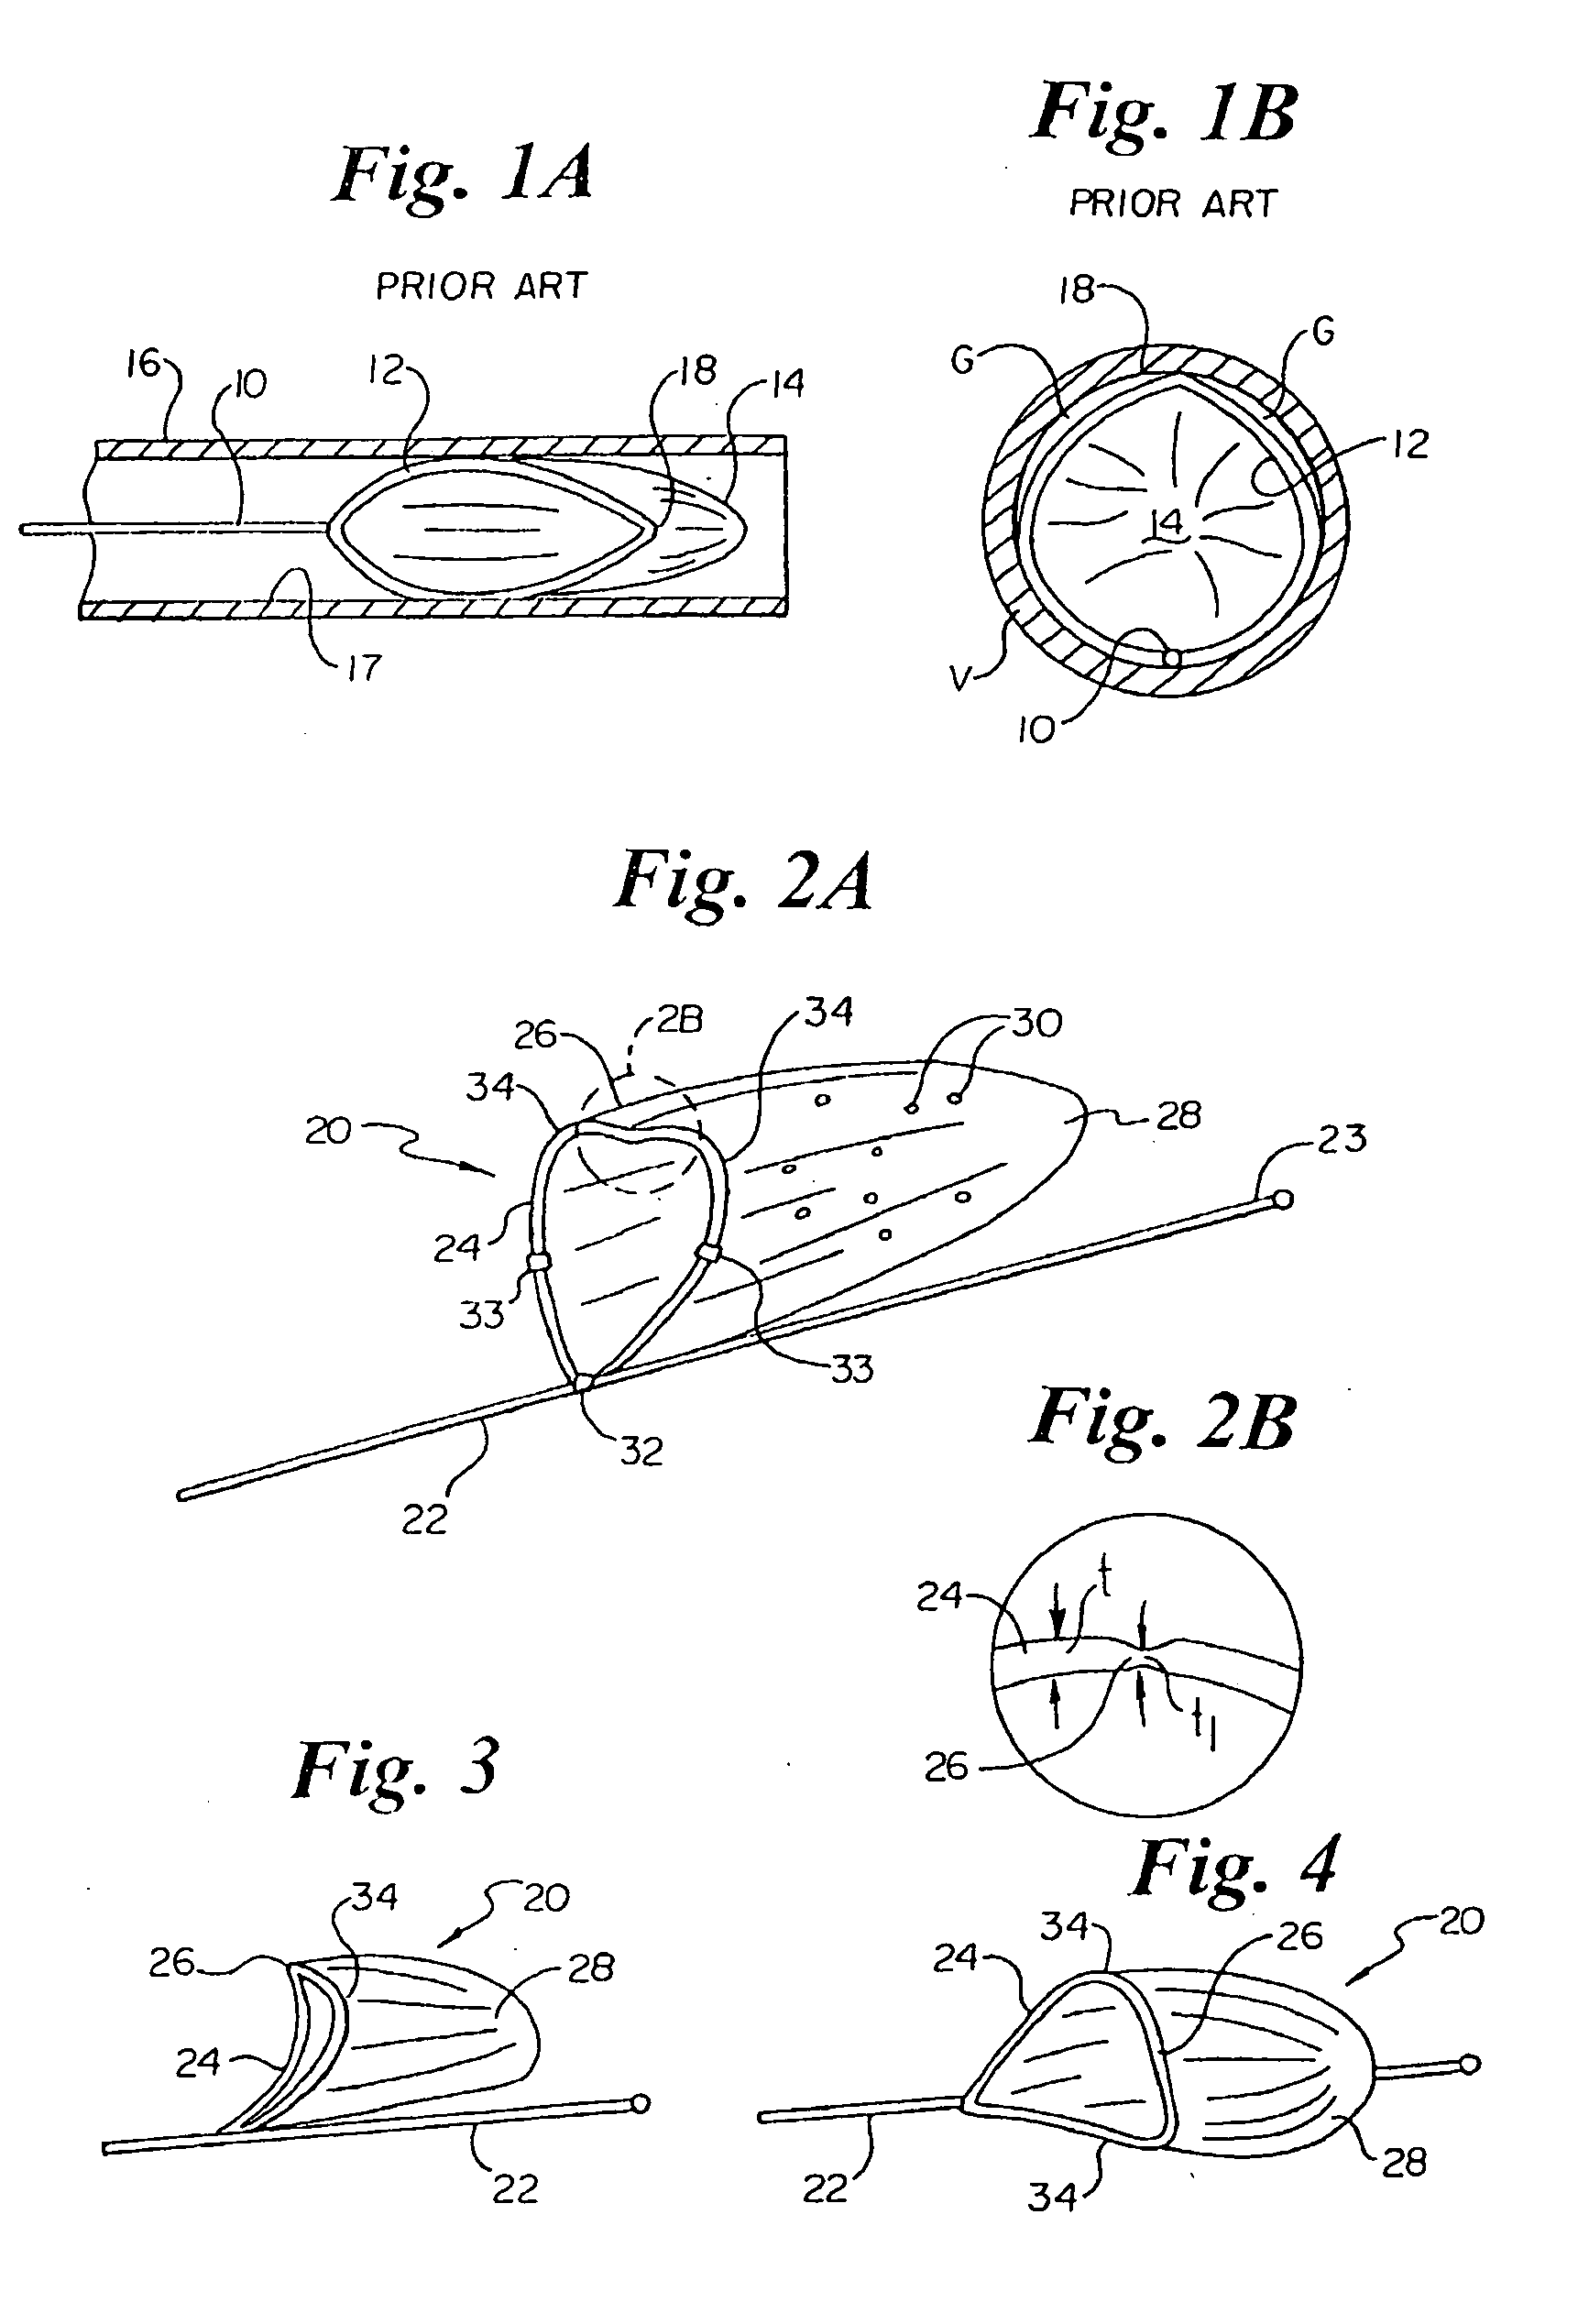 Vascular filter having articulation region and methods of use in the ascending aorta